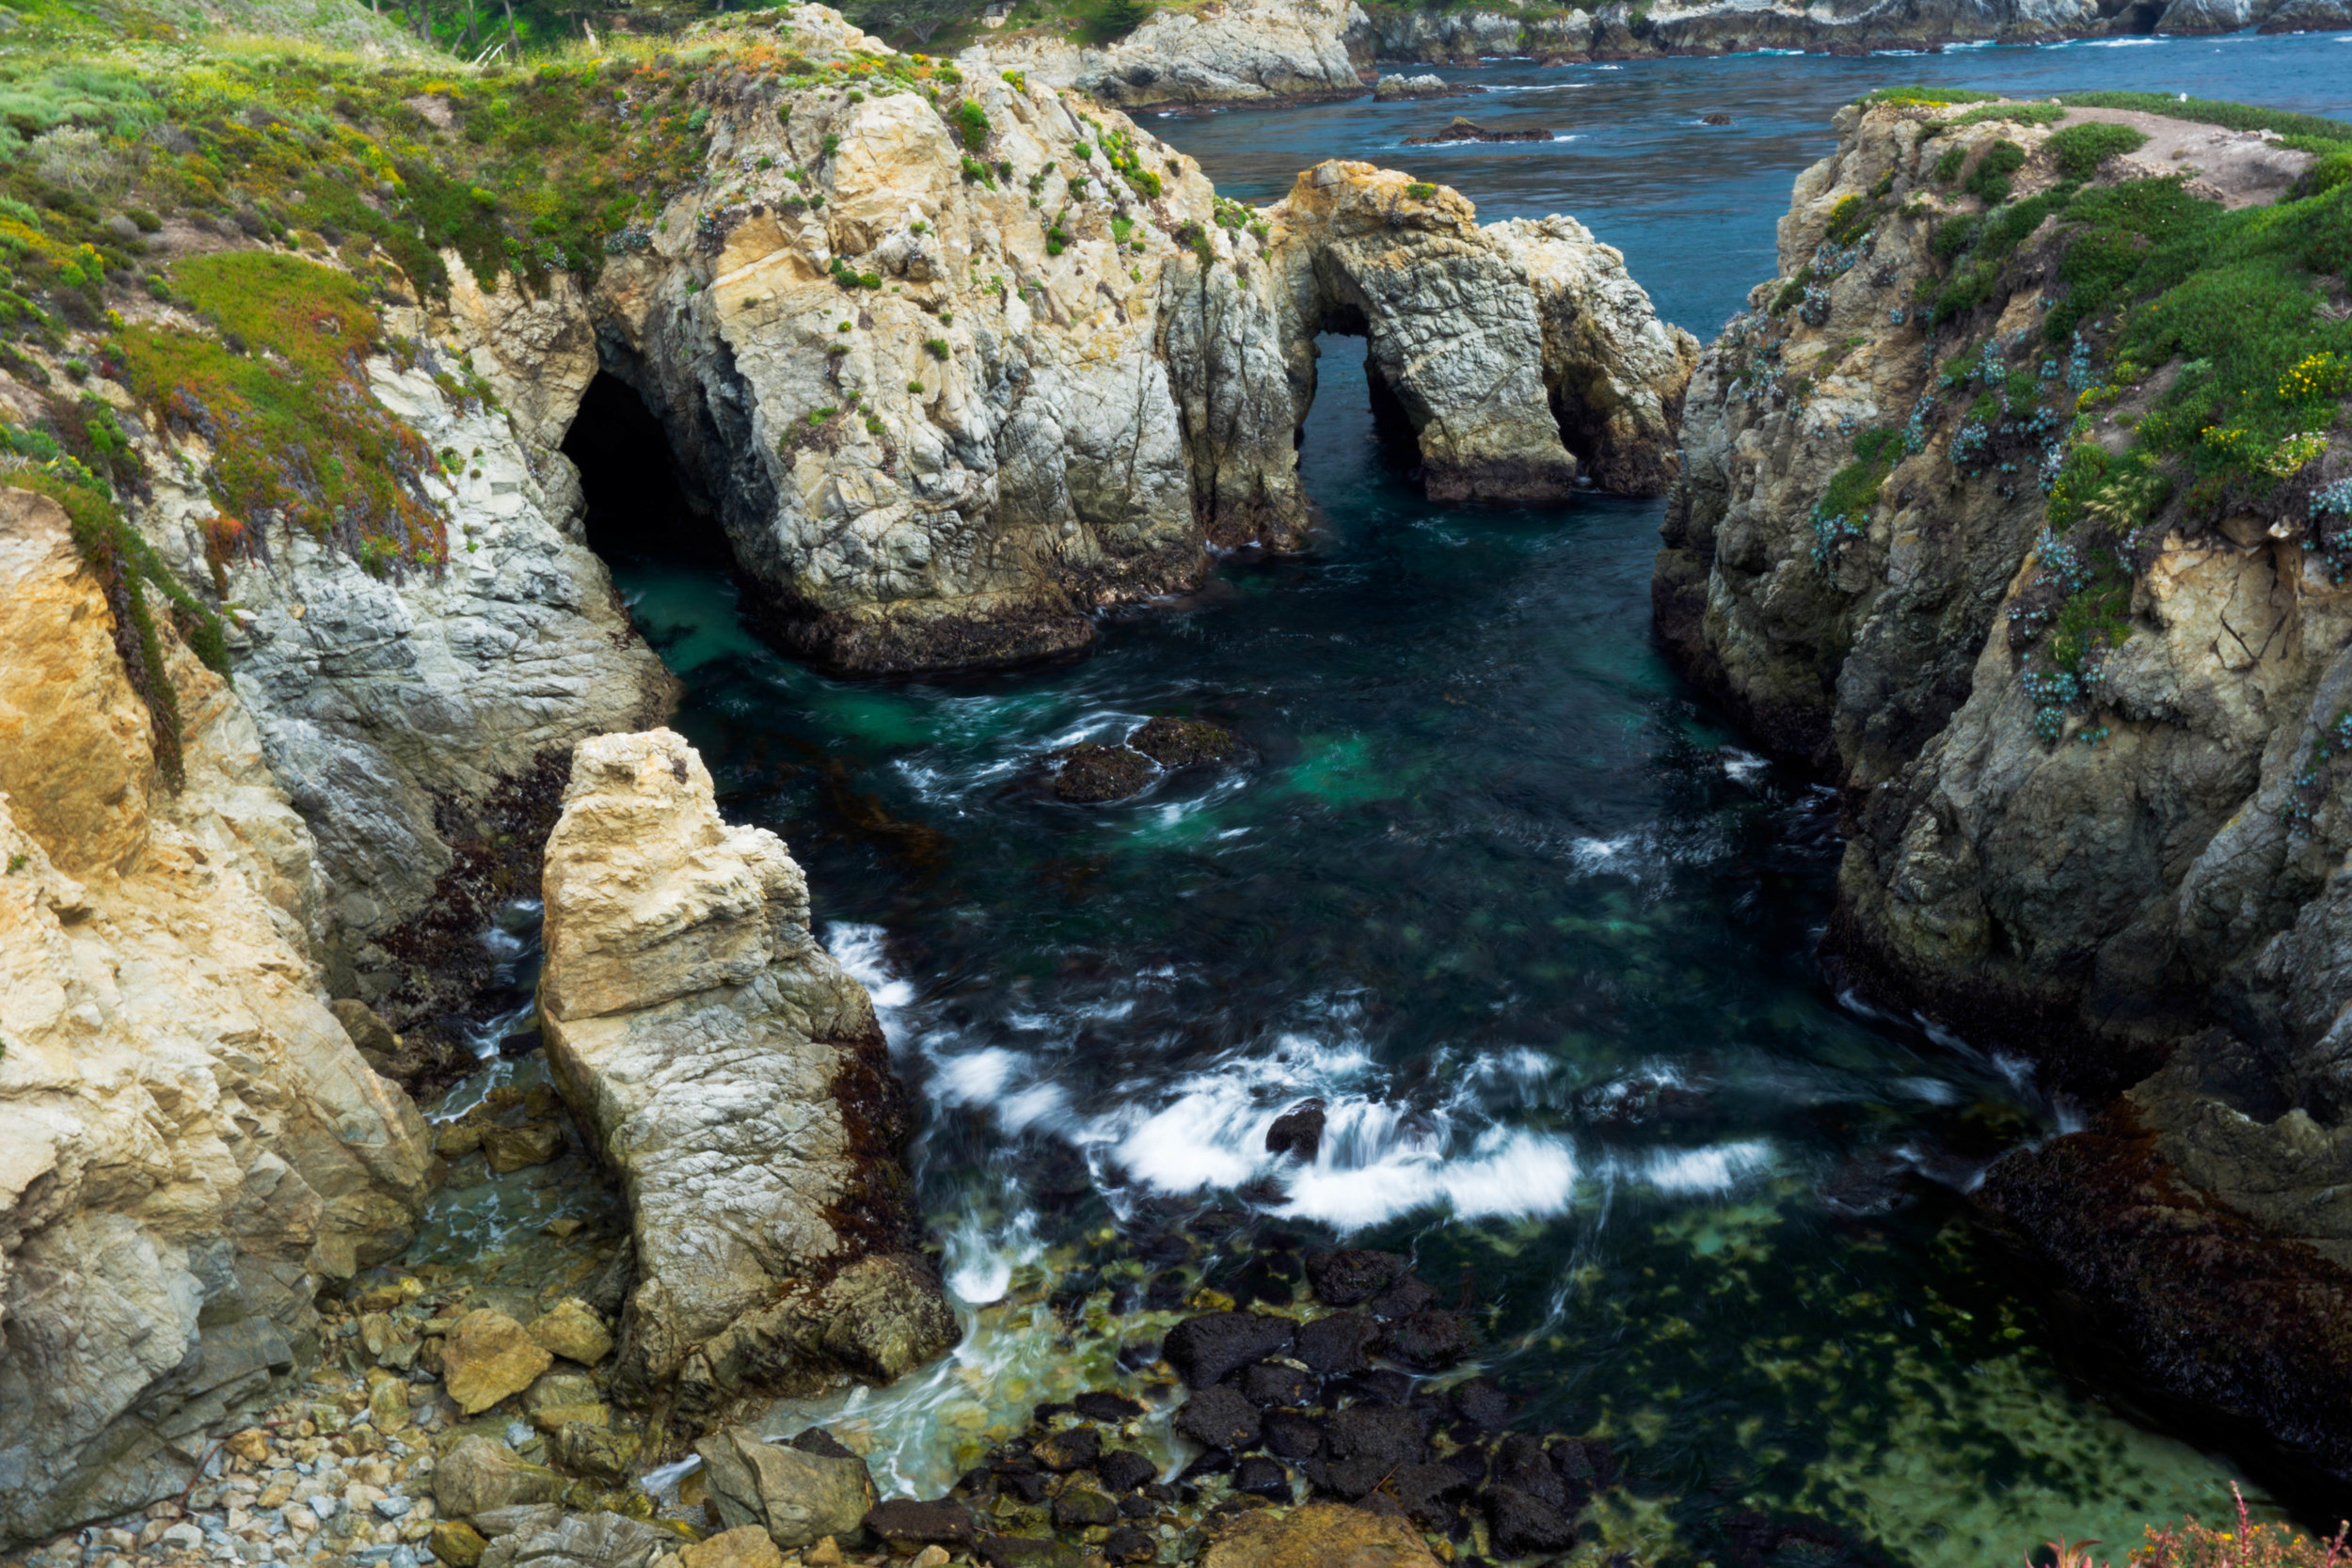 Carved over centuries, sea caves add a drama to the coastal cliffs, telling the story of the sea.